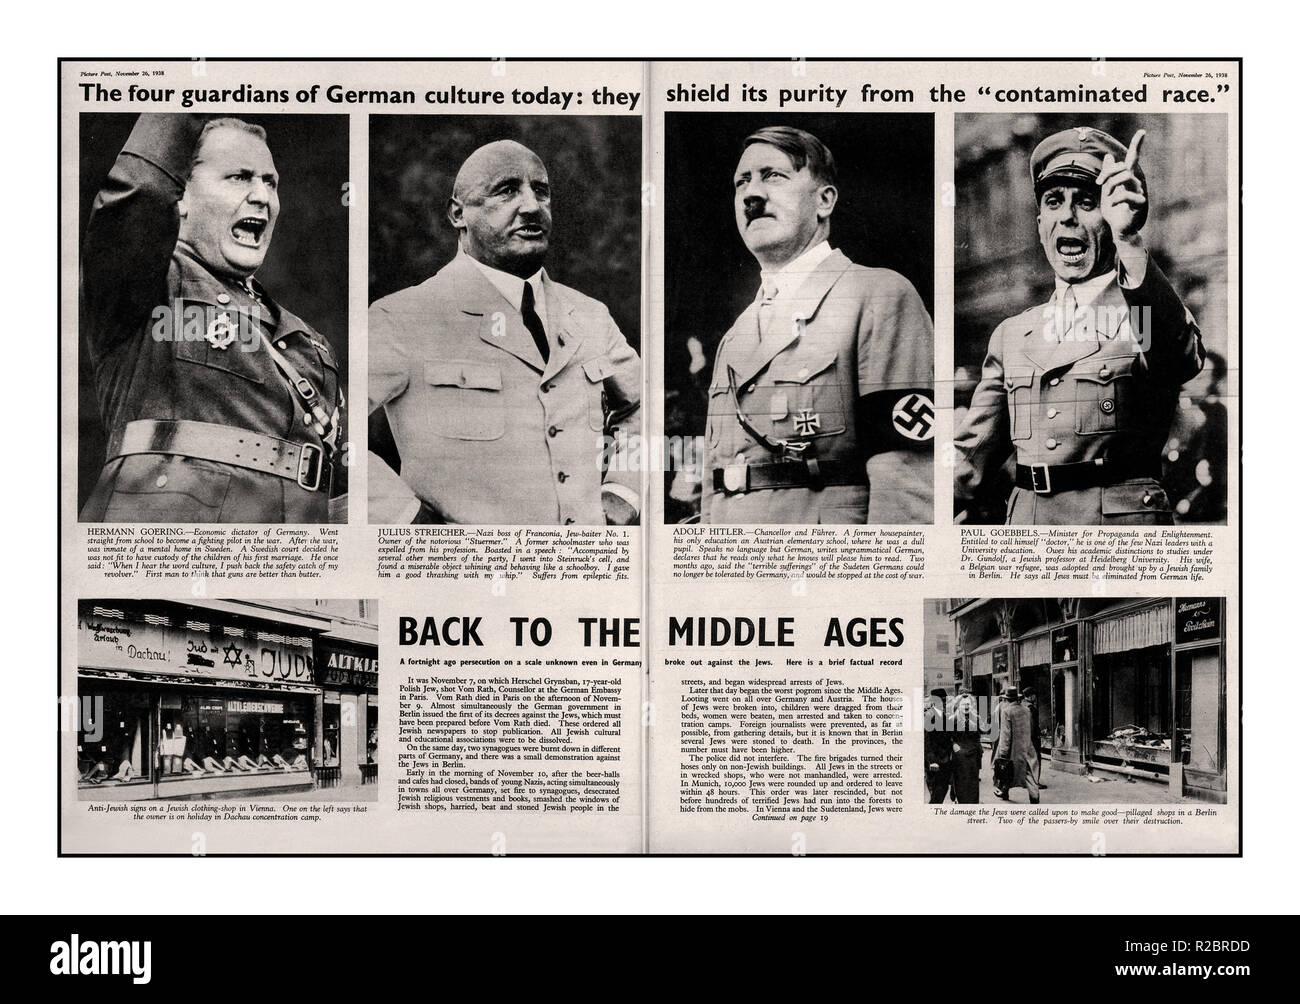 NAZI PERSECUTION PRE- WAR UK NEWS ARTICLE 1938.. Illustrated Newspaper article on German Culture and the Nazi Party. Leading Nazis featured L-R are Hermann Goering, Julius Streicher, Adolf Hitler and Paul Goebbels. Pre WW2 World War WW2 II article highlighting the increasing violent anti-semitic persecution of German Jews by the NSDAP /Nazi Party such as the Kristallnacht pogrom represented by the four leading Nazis featured... 'Picture Post' Great Britain Nov 26th 1938 Stock Photo